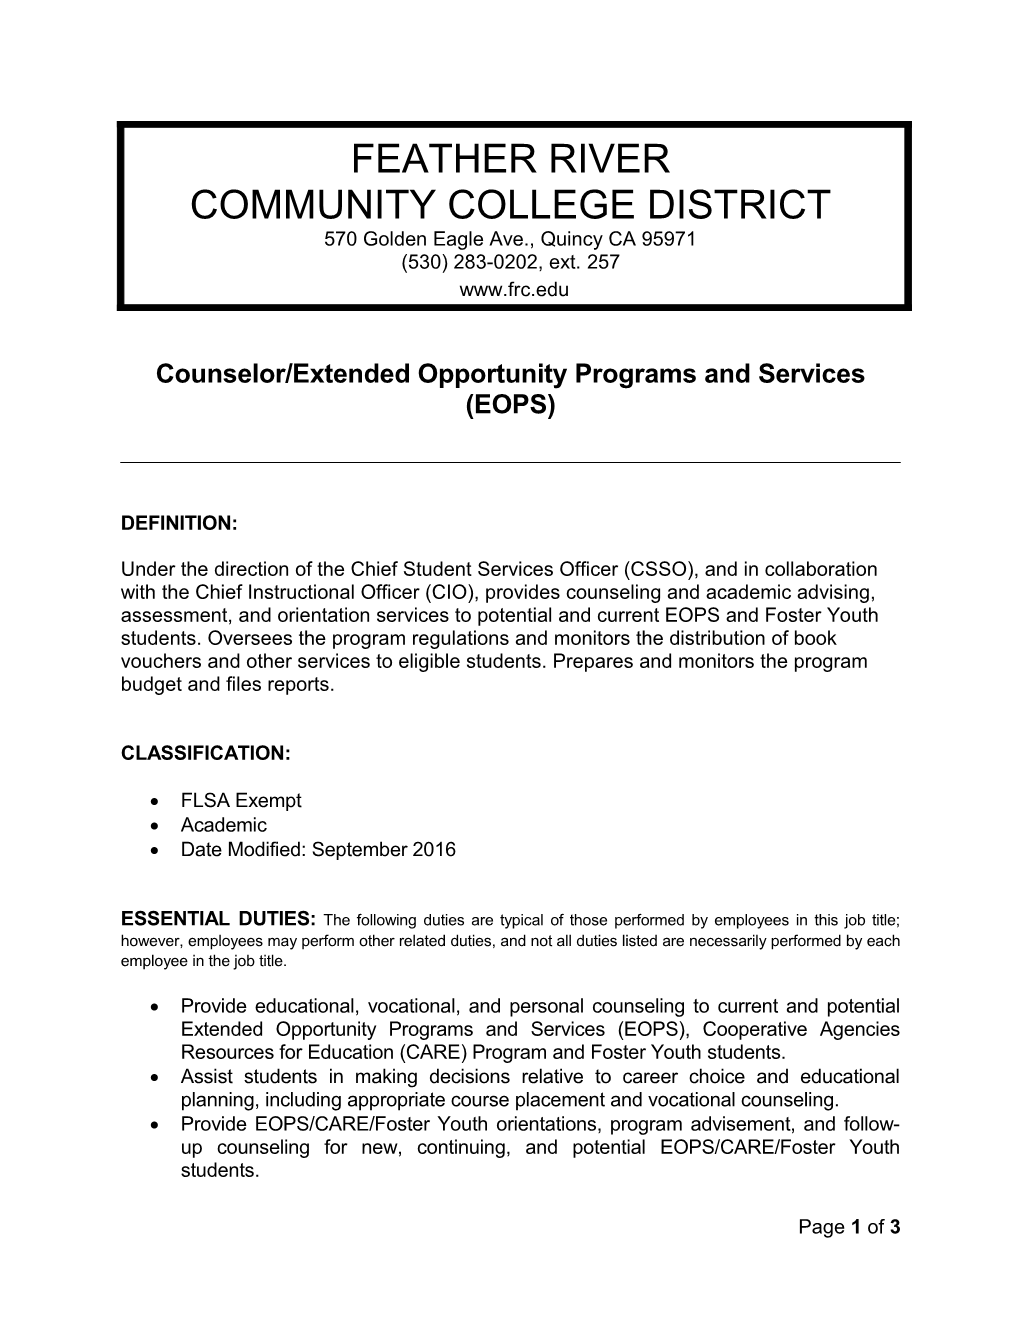 Counselor/Extended Opportunity Programs and Services (EOPS)